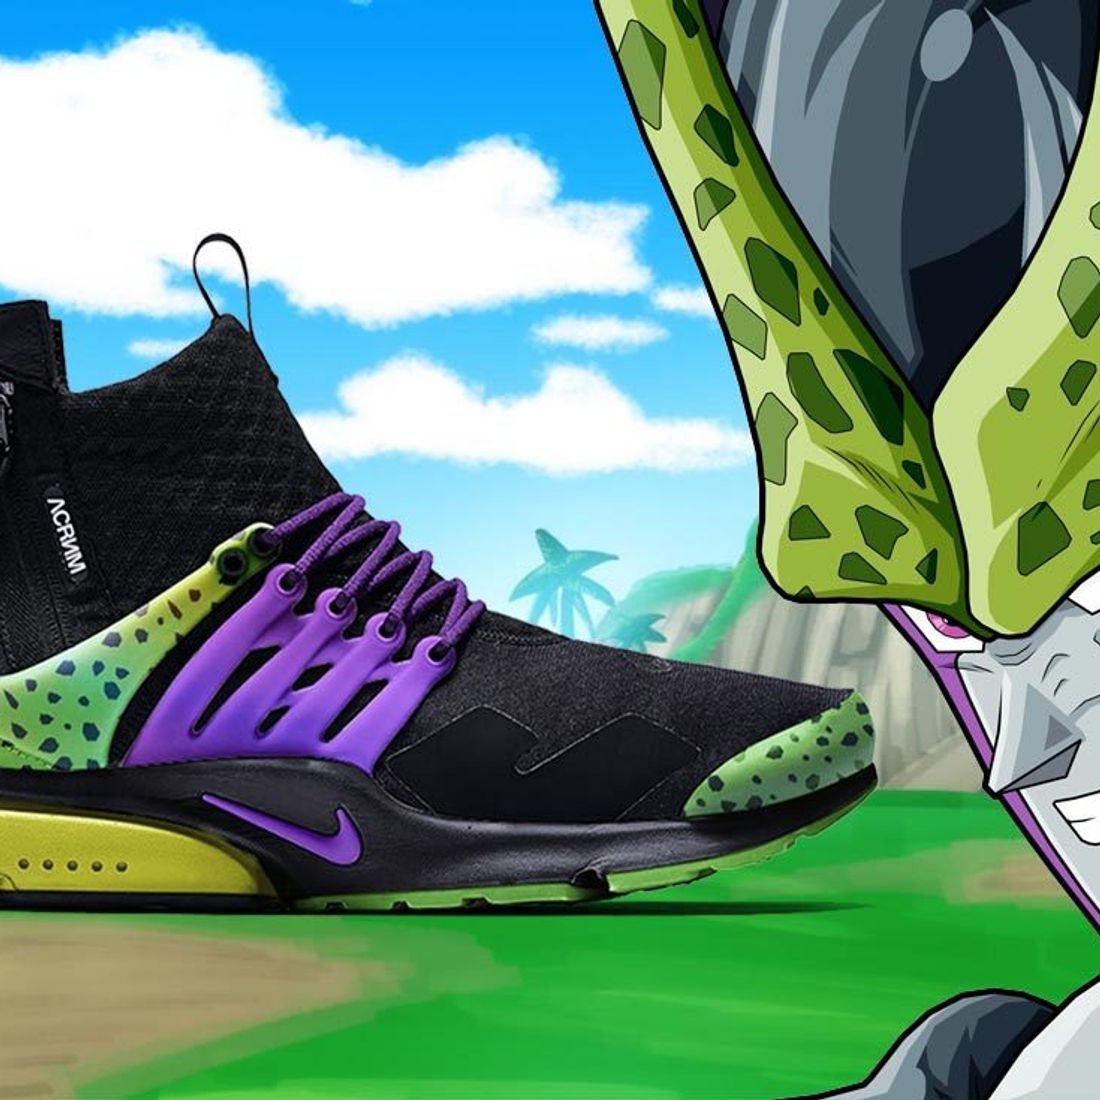 Out Stunning Dragon Ball x Nike Concepts - Sneaker